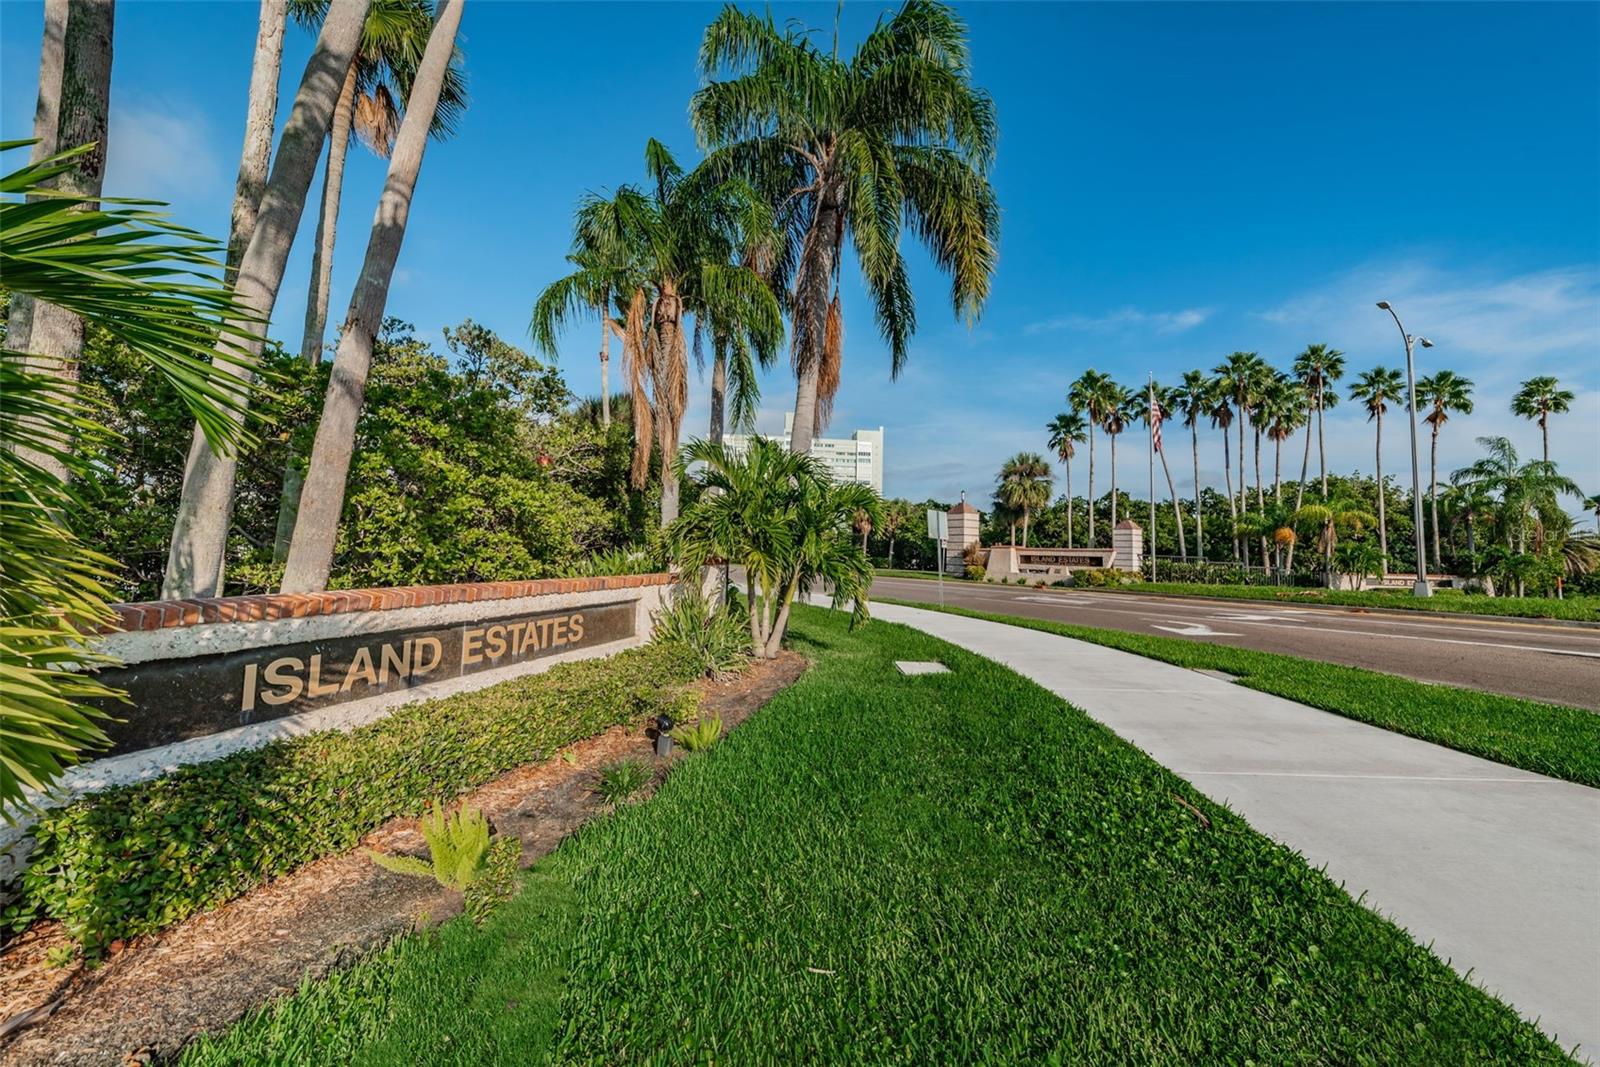 The Island Estates entrance is more than just an introduction; it's the threshold to a lifestyle defined by elegance and tranquility.